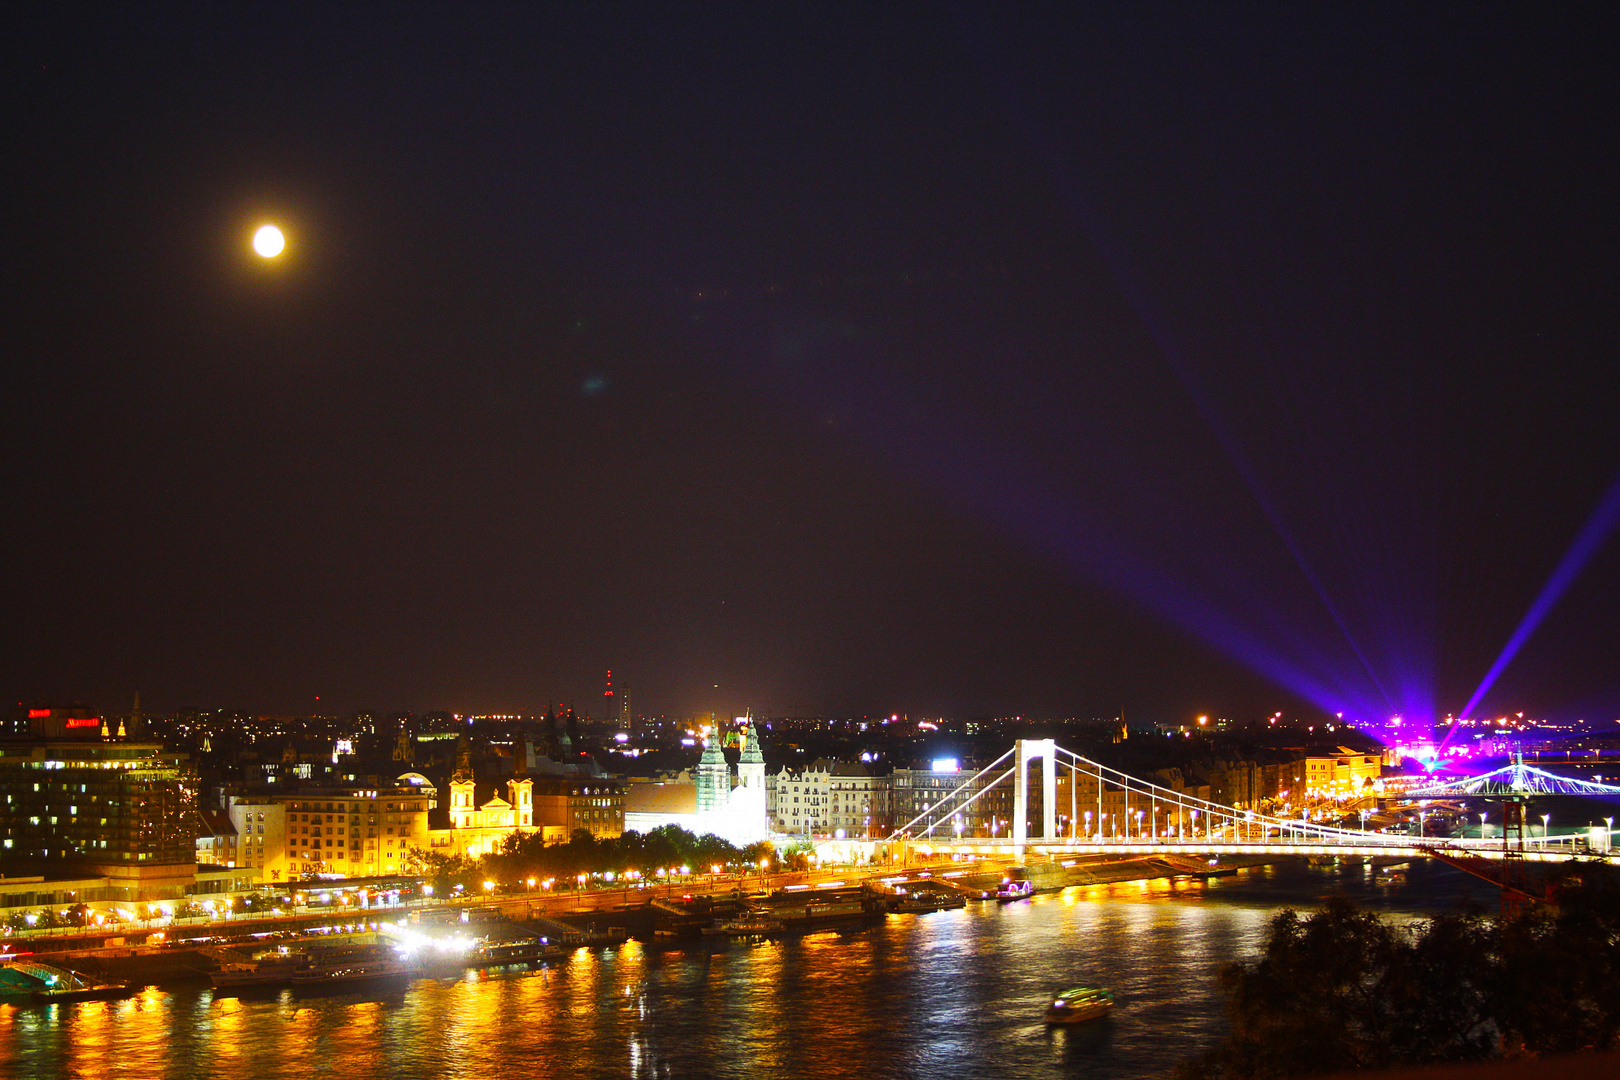 Budapest in the night